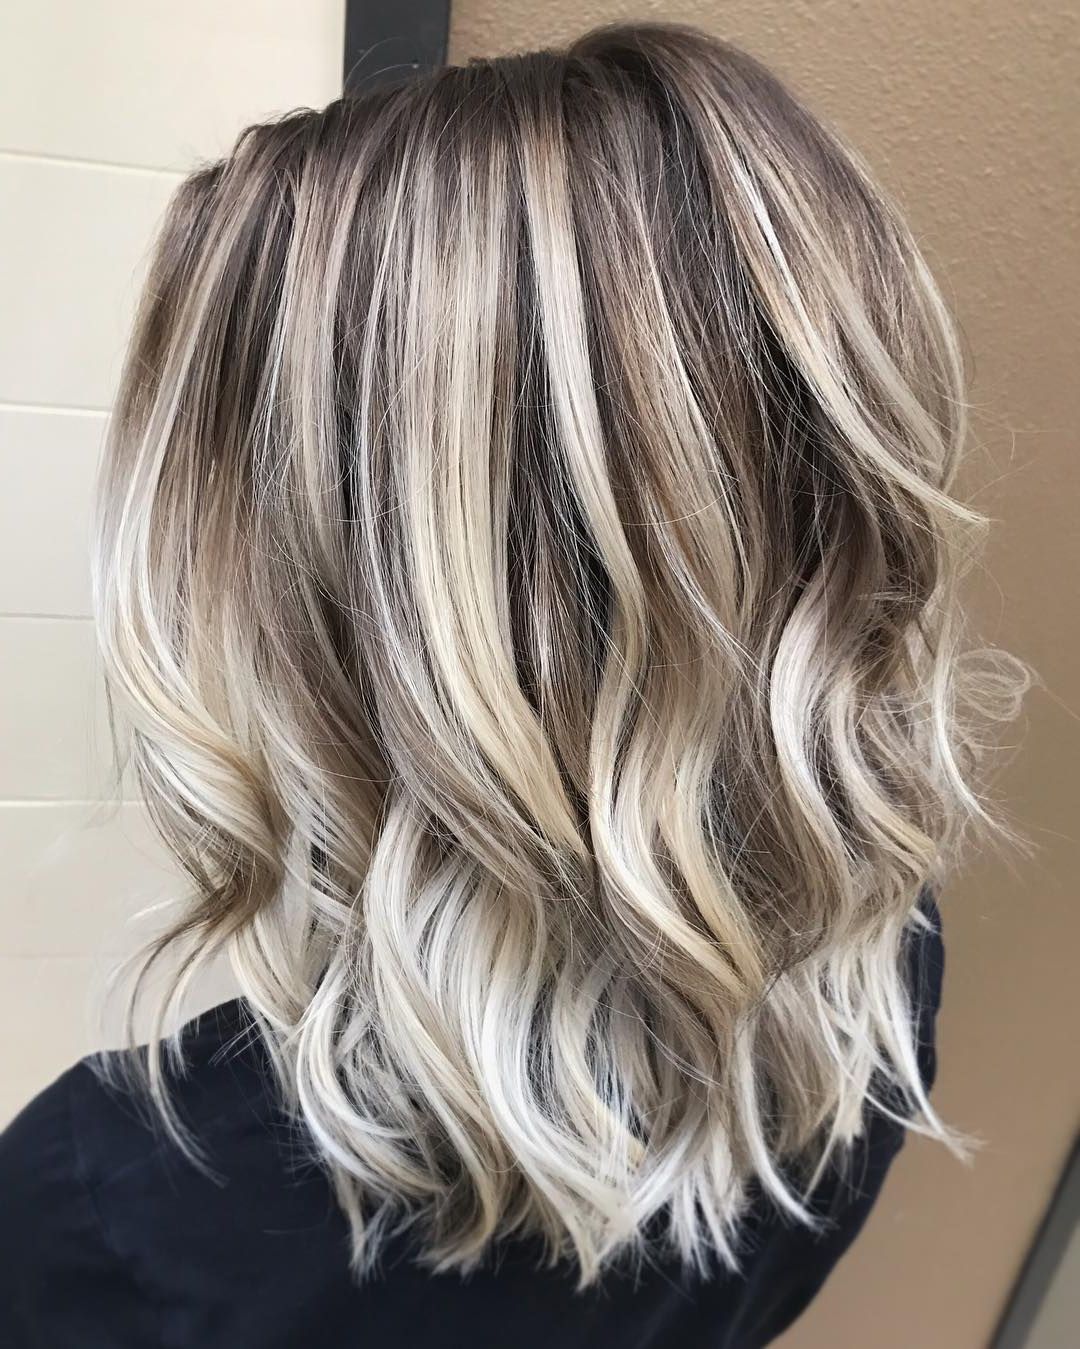 10 Ash Blonde Hairstyles For All Skin Tones, 2018 Best Hair Color Trends With Ash Blonde Bob Hairstyles With Feathered Layers (View 7 of 20)